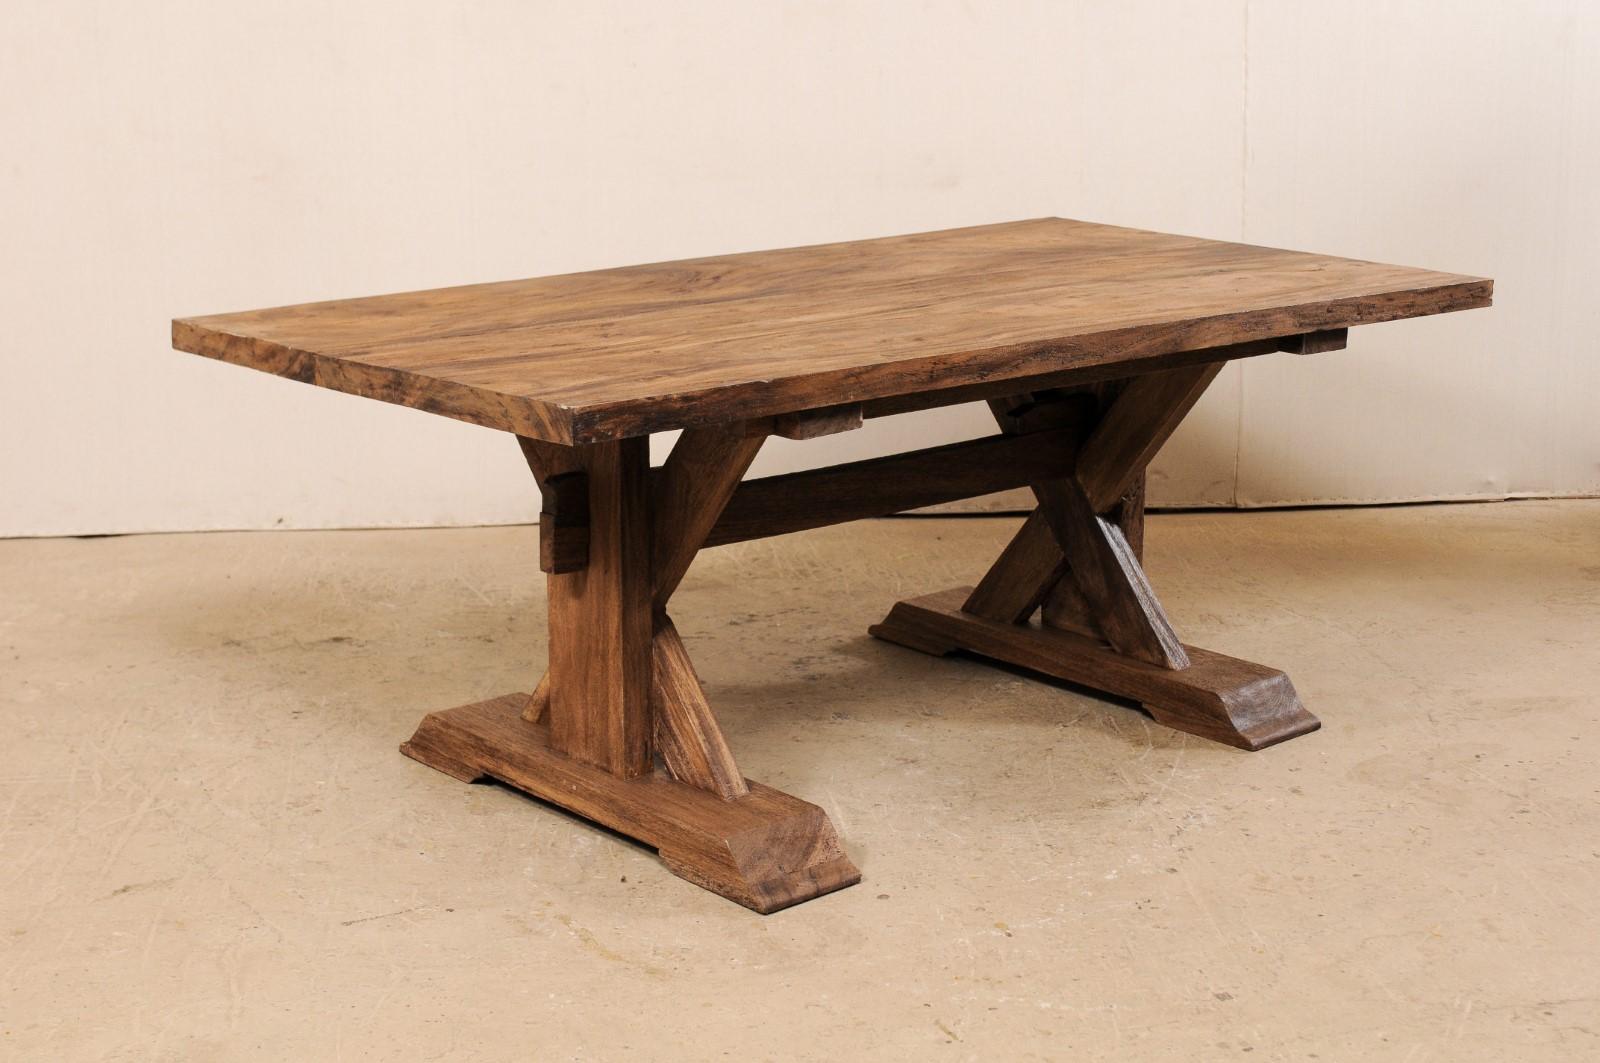 A vintage trestle table with x-frame base of reclaimed wood. This trestle-style table has been made of reclaimed Indonesian wood, a sturdy tropical hardwood, having a rectangular-shaped top which is raised by a pair of trestle legs, with x-shaped